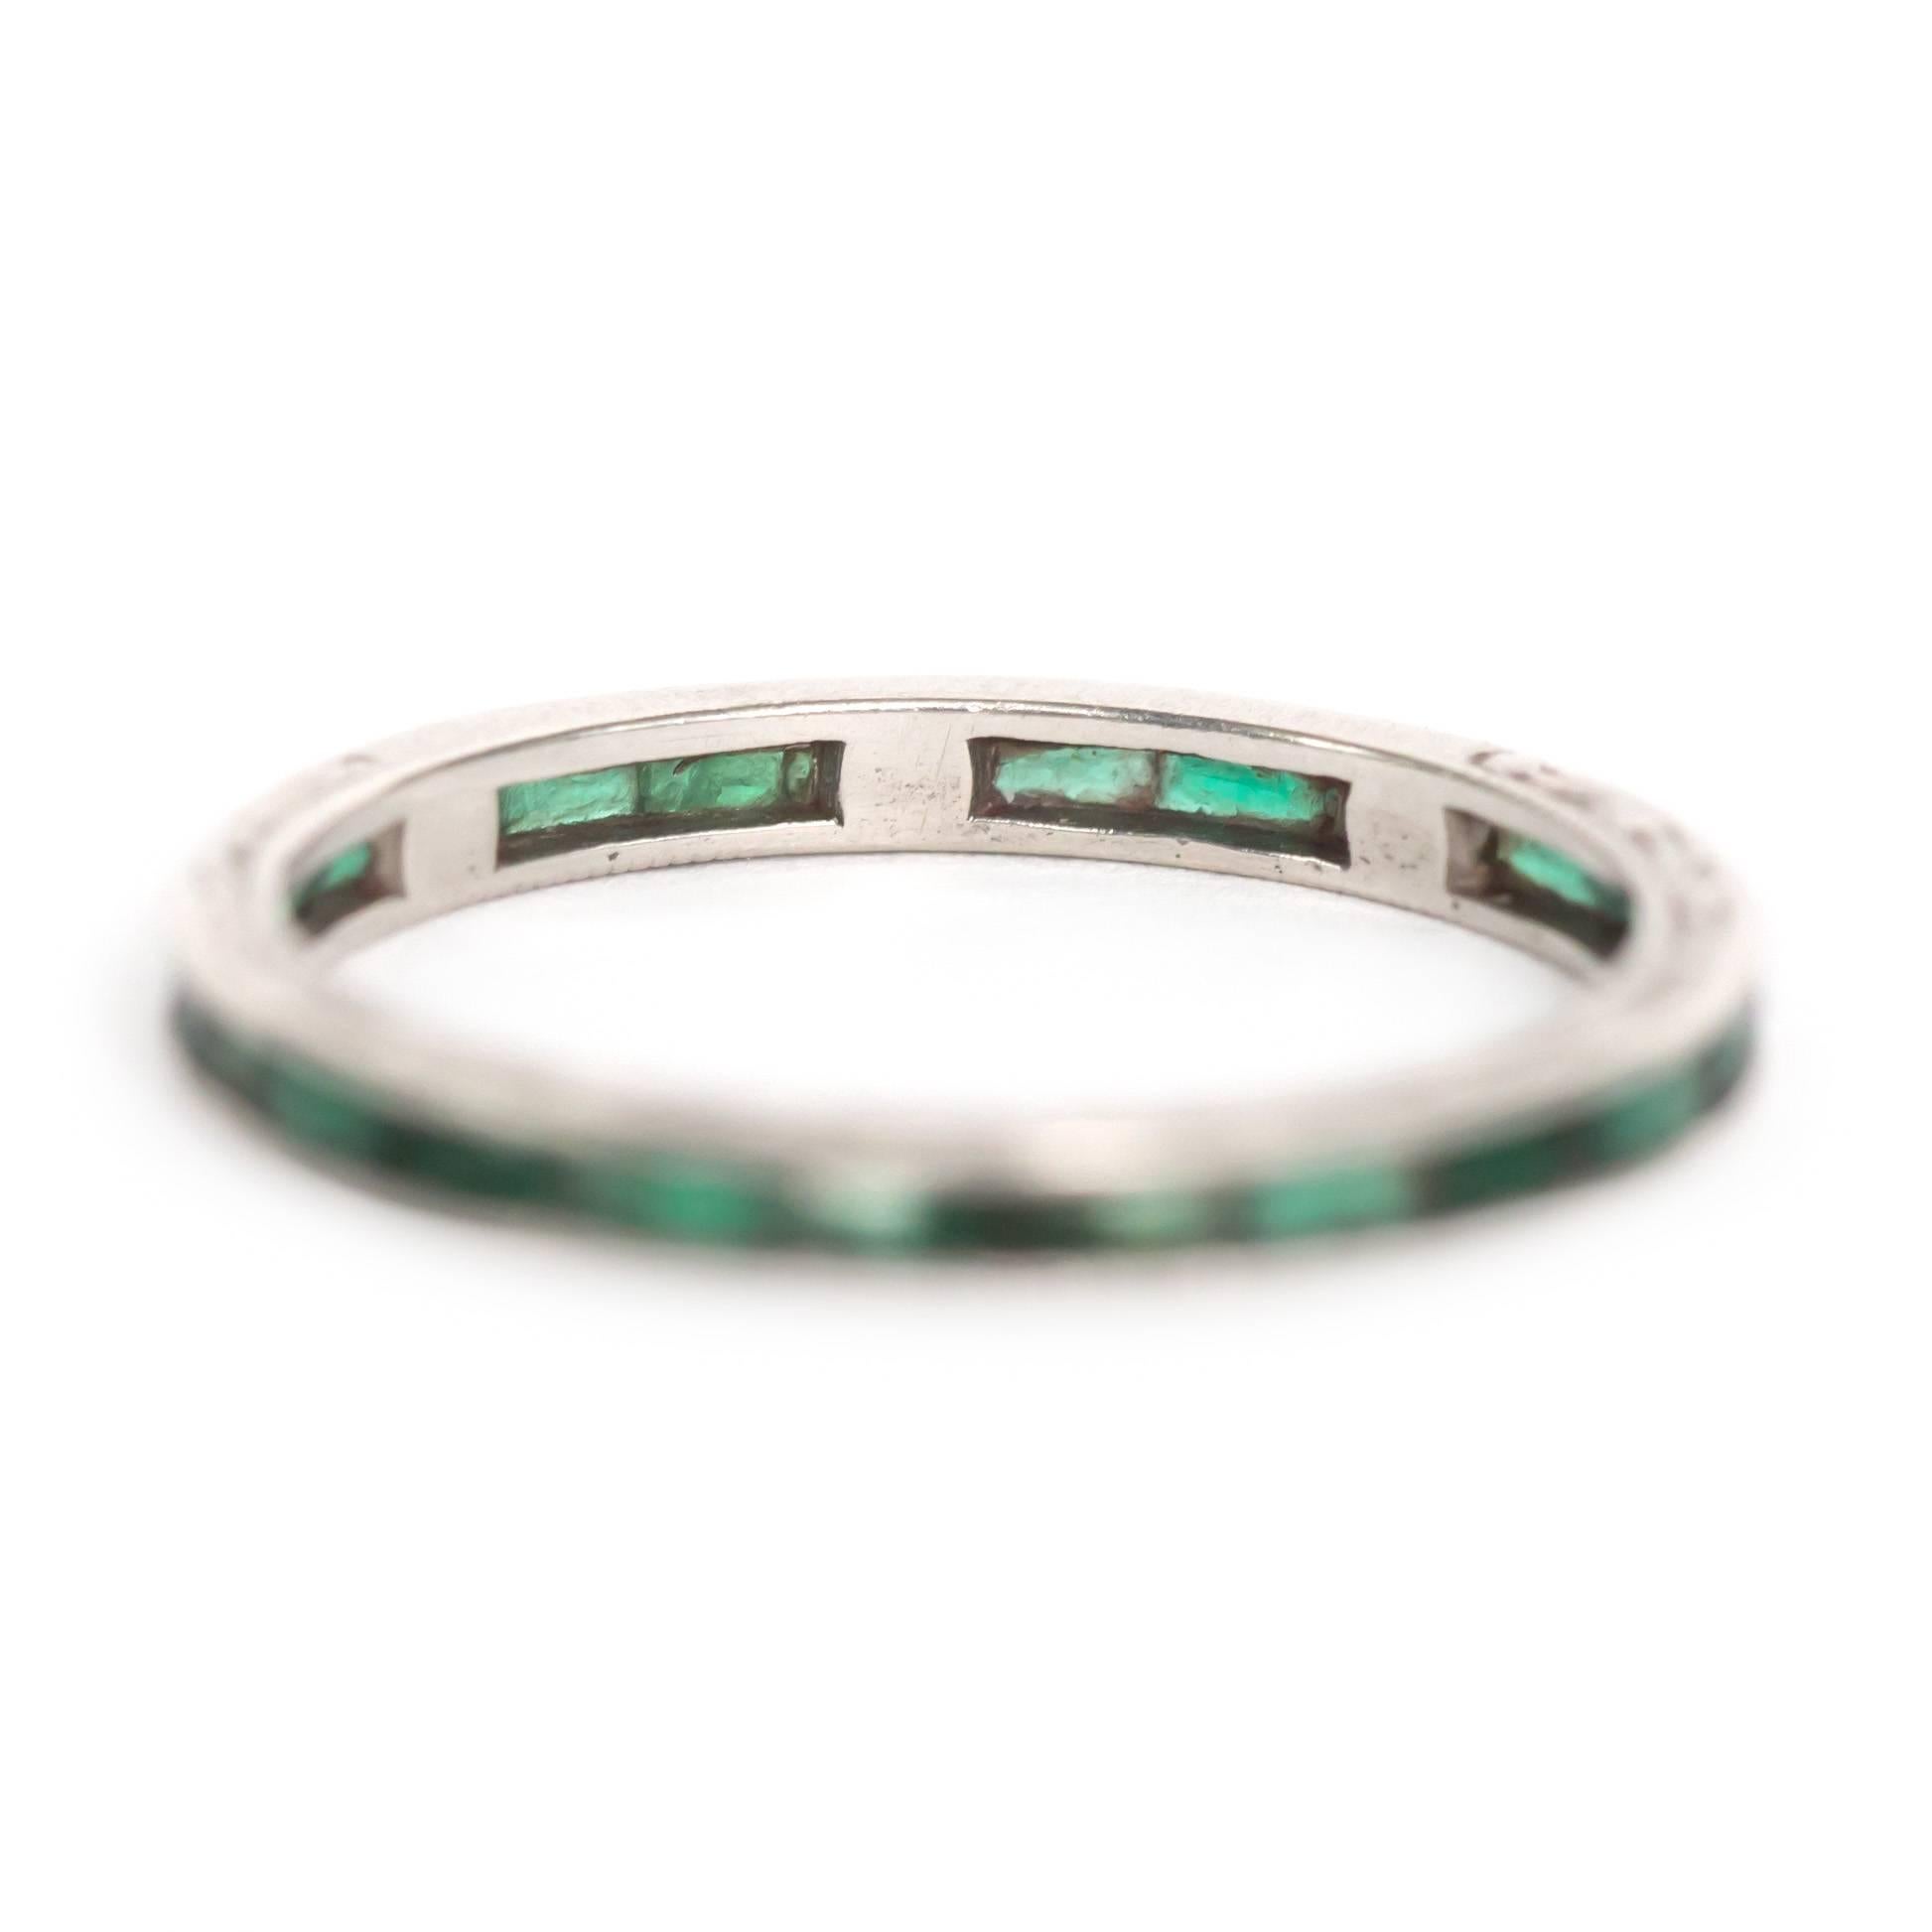 Item Details: 
Ring Size: Approx. 5.25
Metal Type: Platinum
Weight: 1.7 grams

Stone Details
Type: Natural Emerald
Shape: French Cut
Carat Weight: .75 carat, total weight

Finger to Top of Stone Measurement: 1.44mm